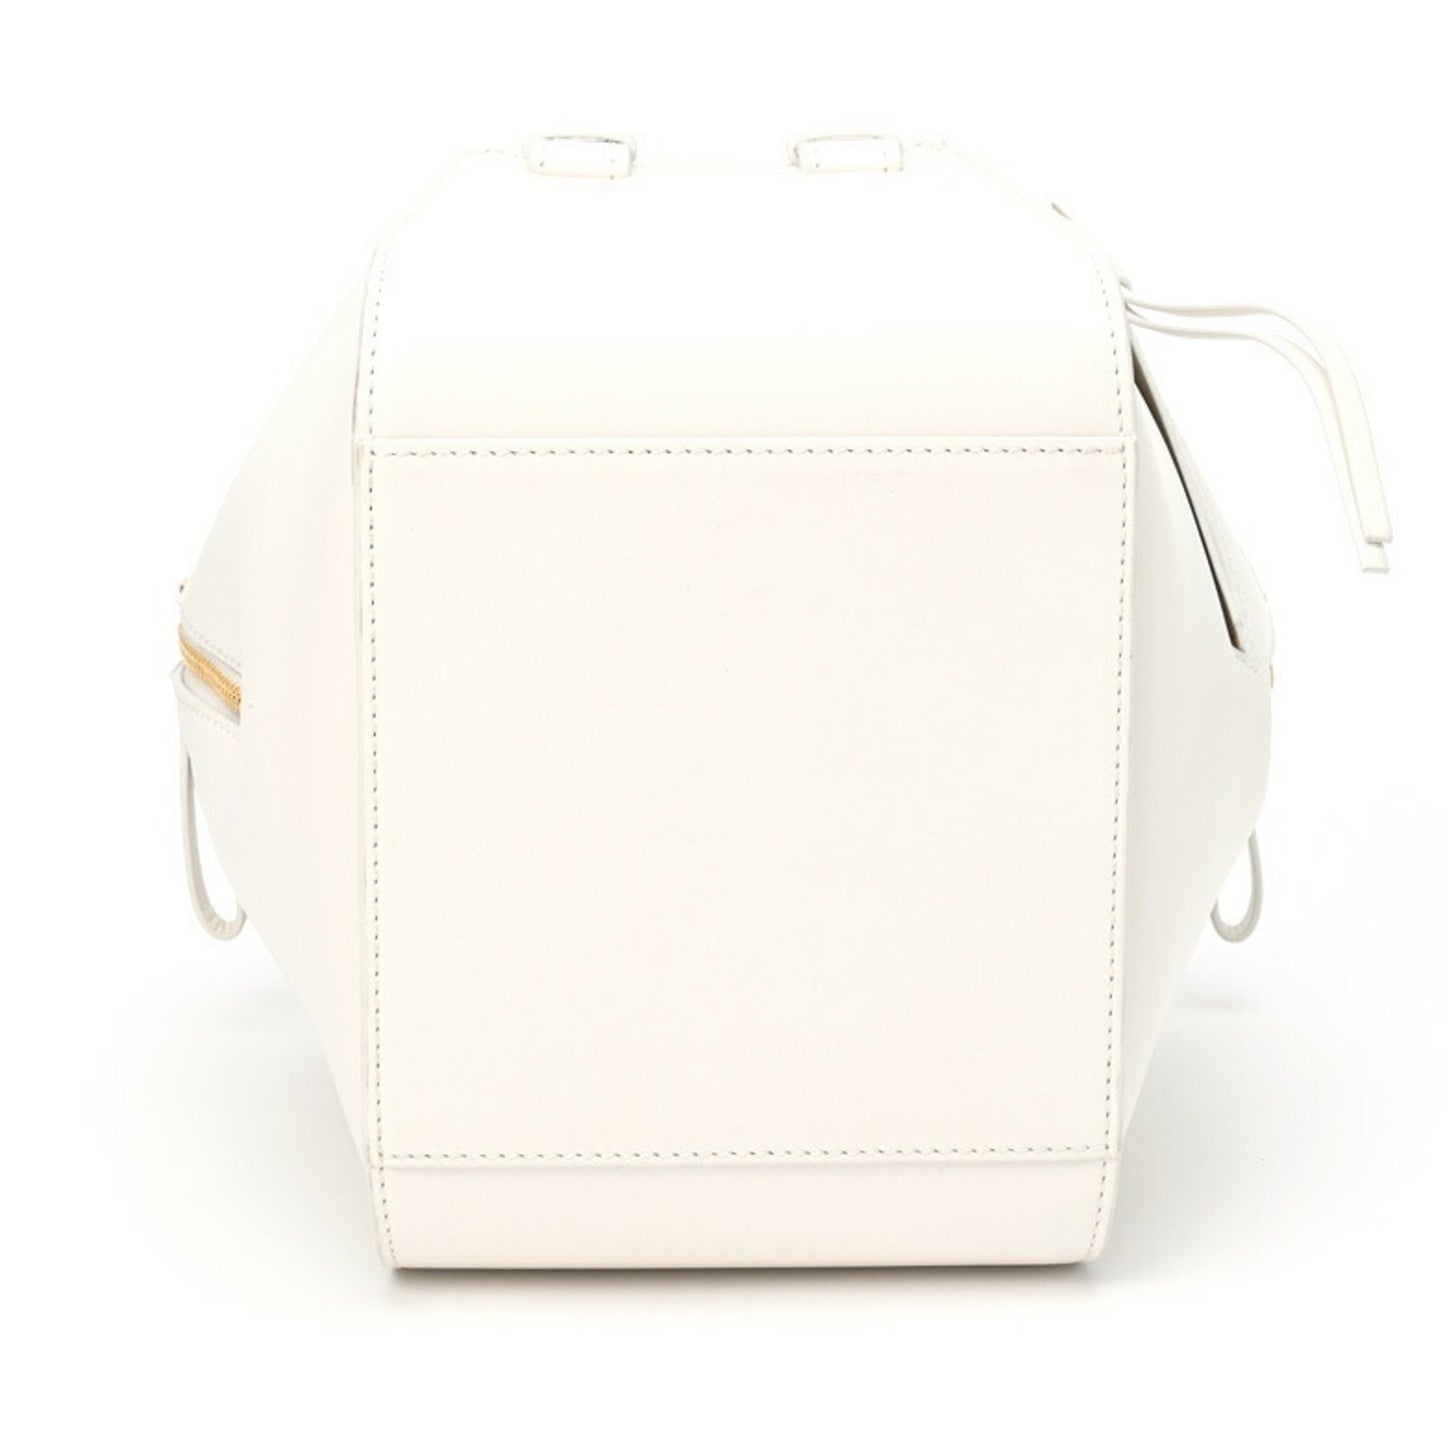 Loewe Women's Versatile white leather shoulder bag with unique silhouette in White